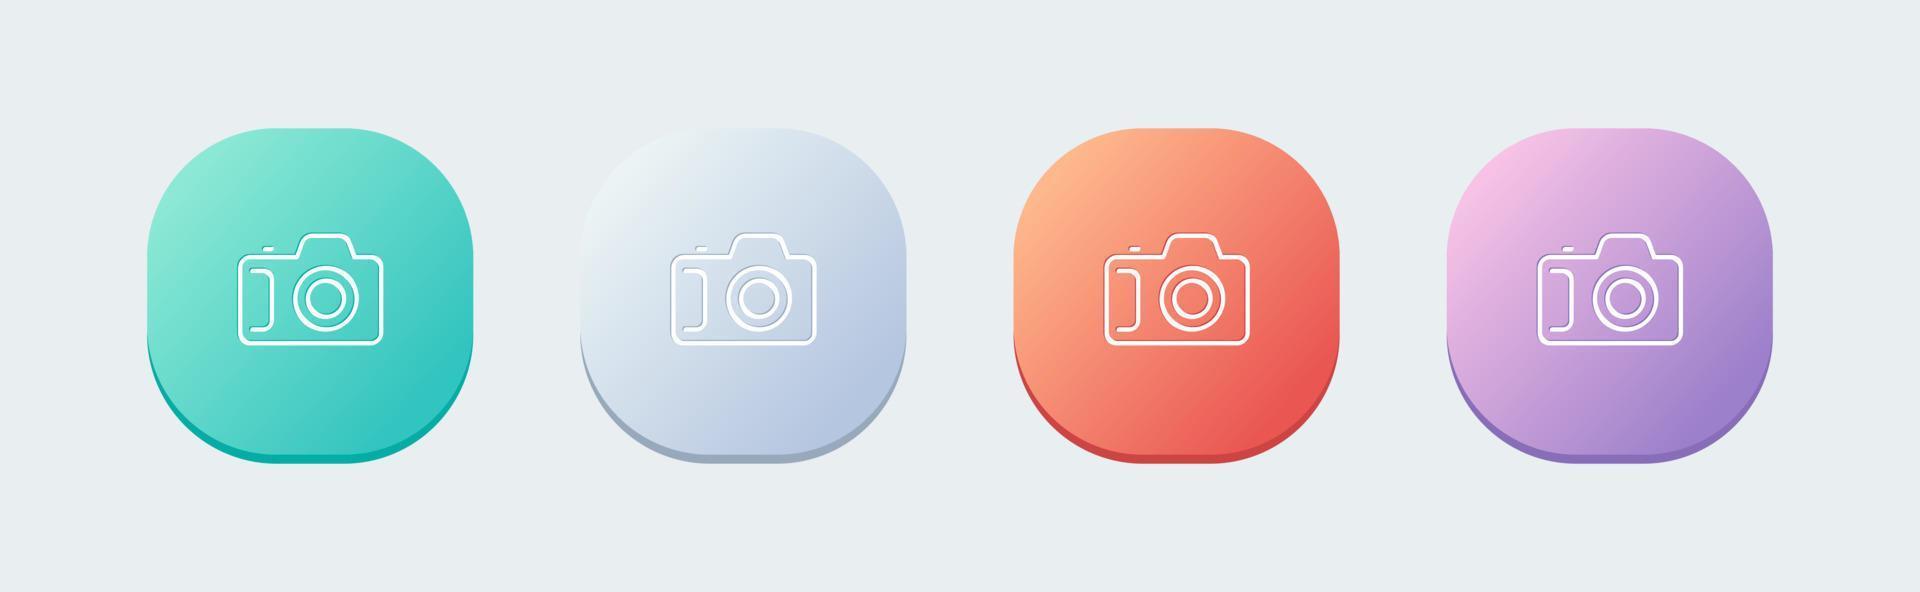 Camera line icon in flat design style. Foto signs vector illustration.